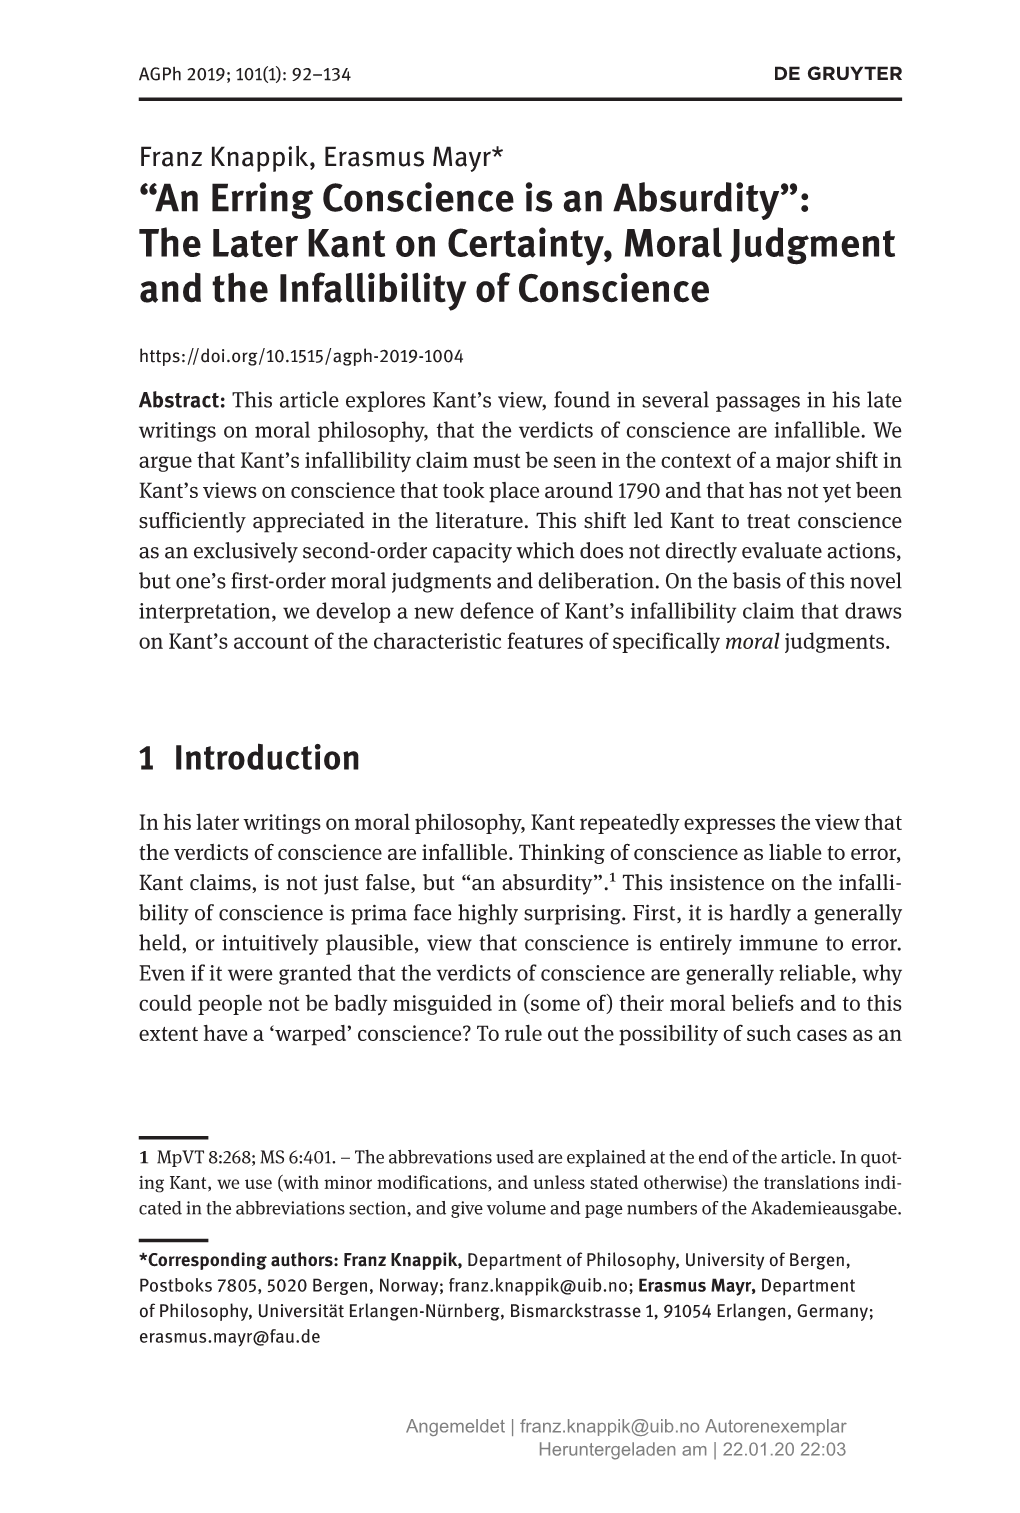 The Later Kant on Certainty, Moral Judgment and the Infallibility of Conscience